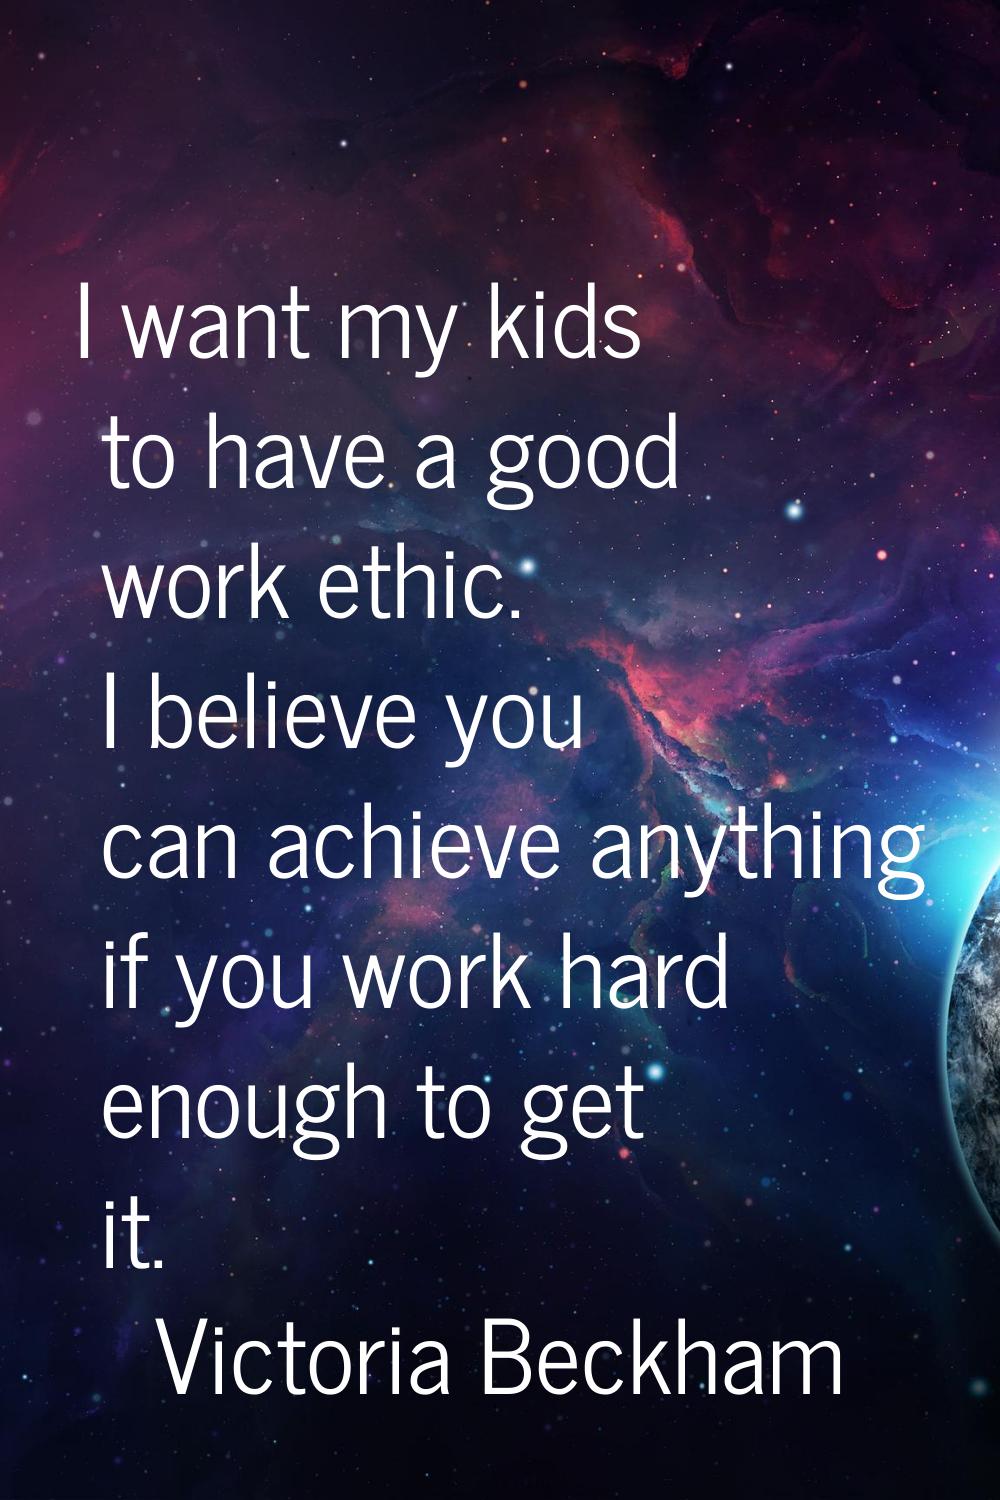 I want my kids to have a good work ethic. I believe you can achieve anything if you work hard enoug